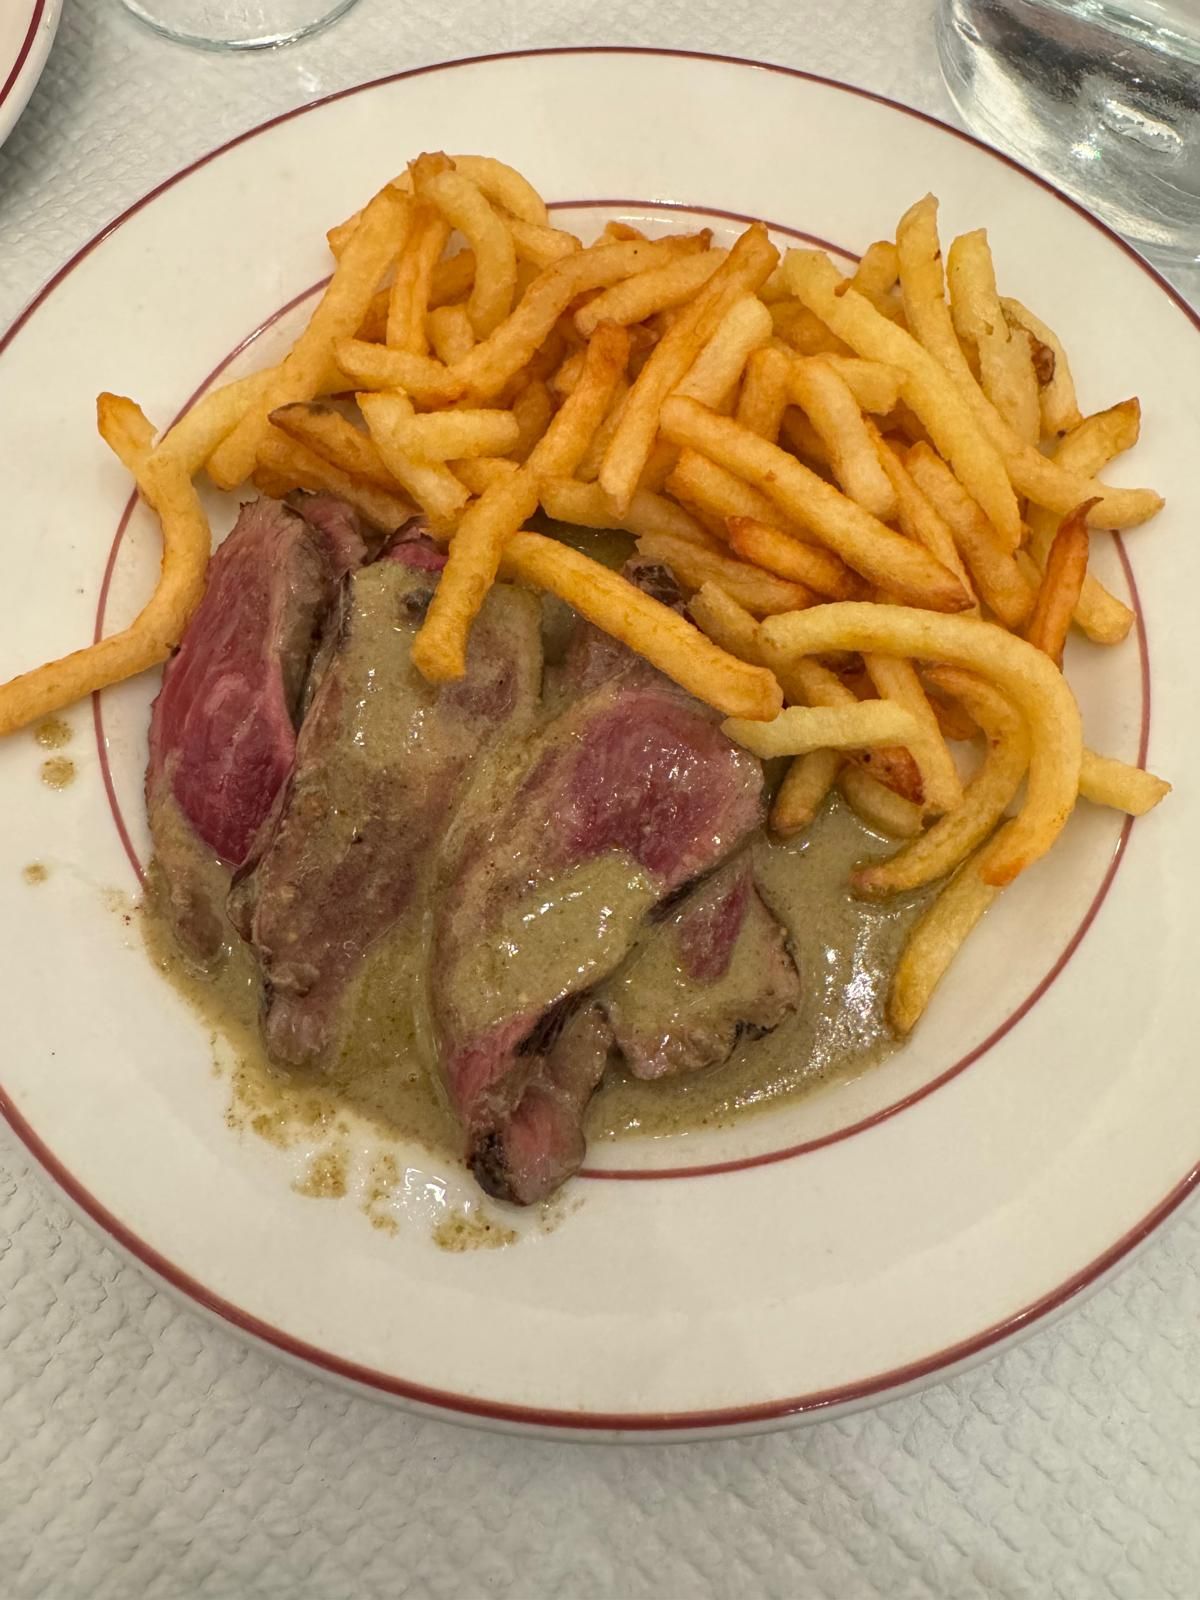 Steak with frites